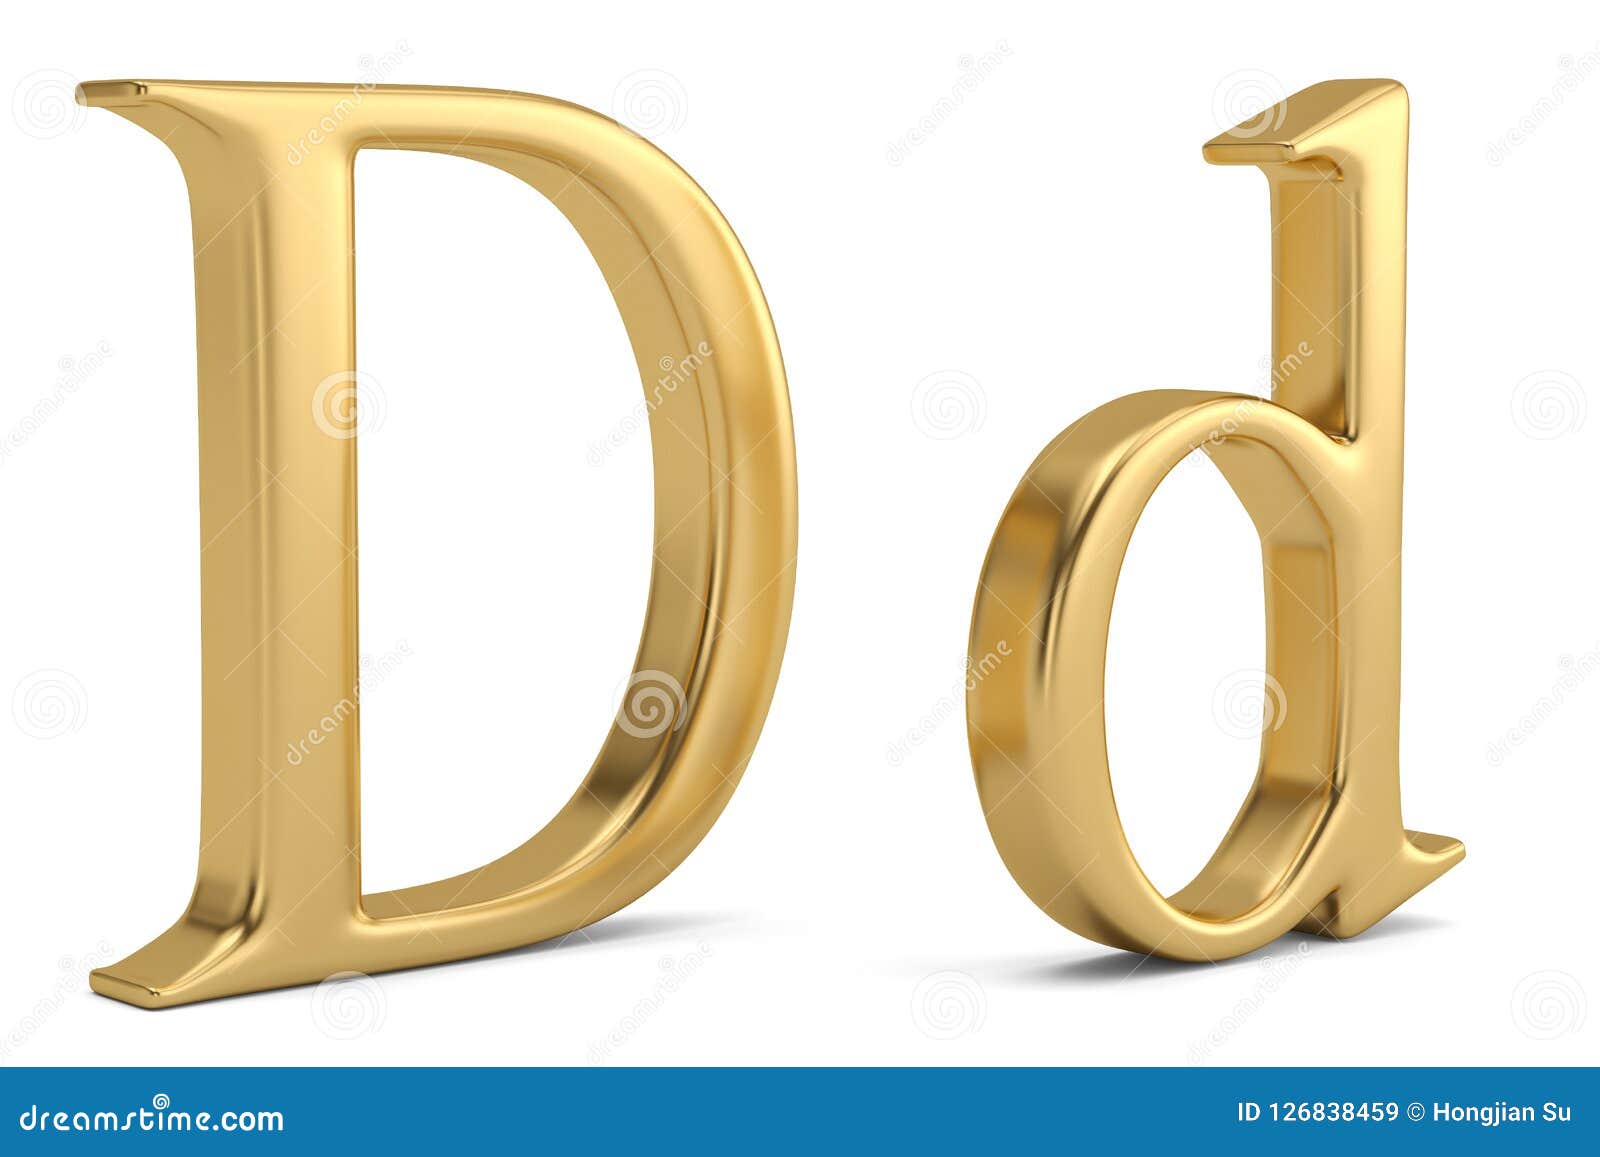 Gold Metal D Alphabet Isolated on White Background 3D Illustration ...